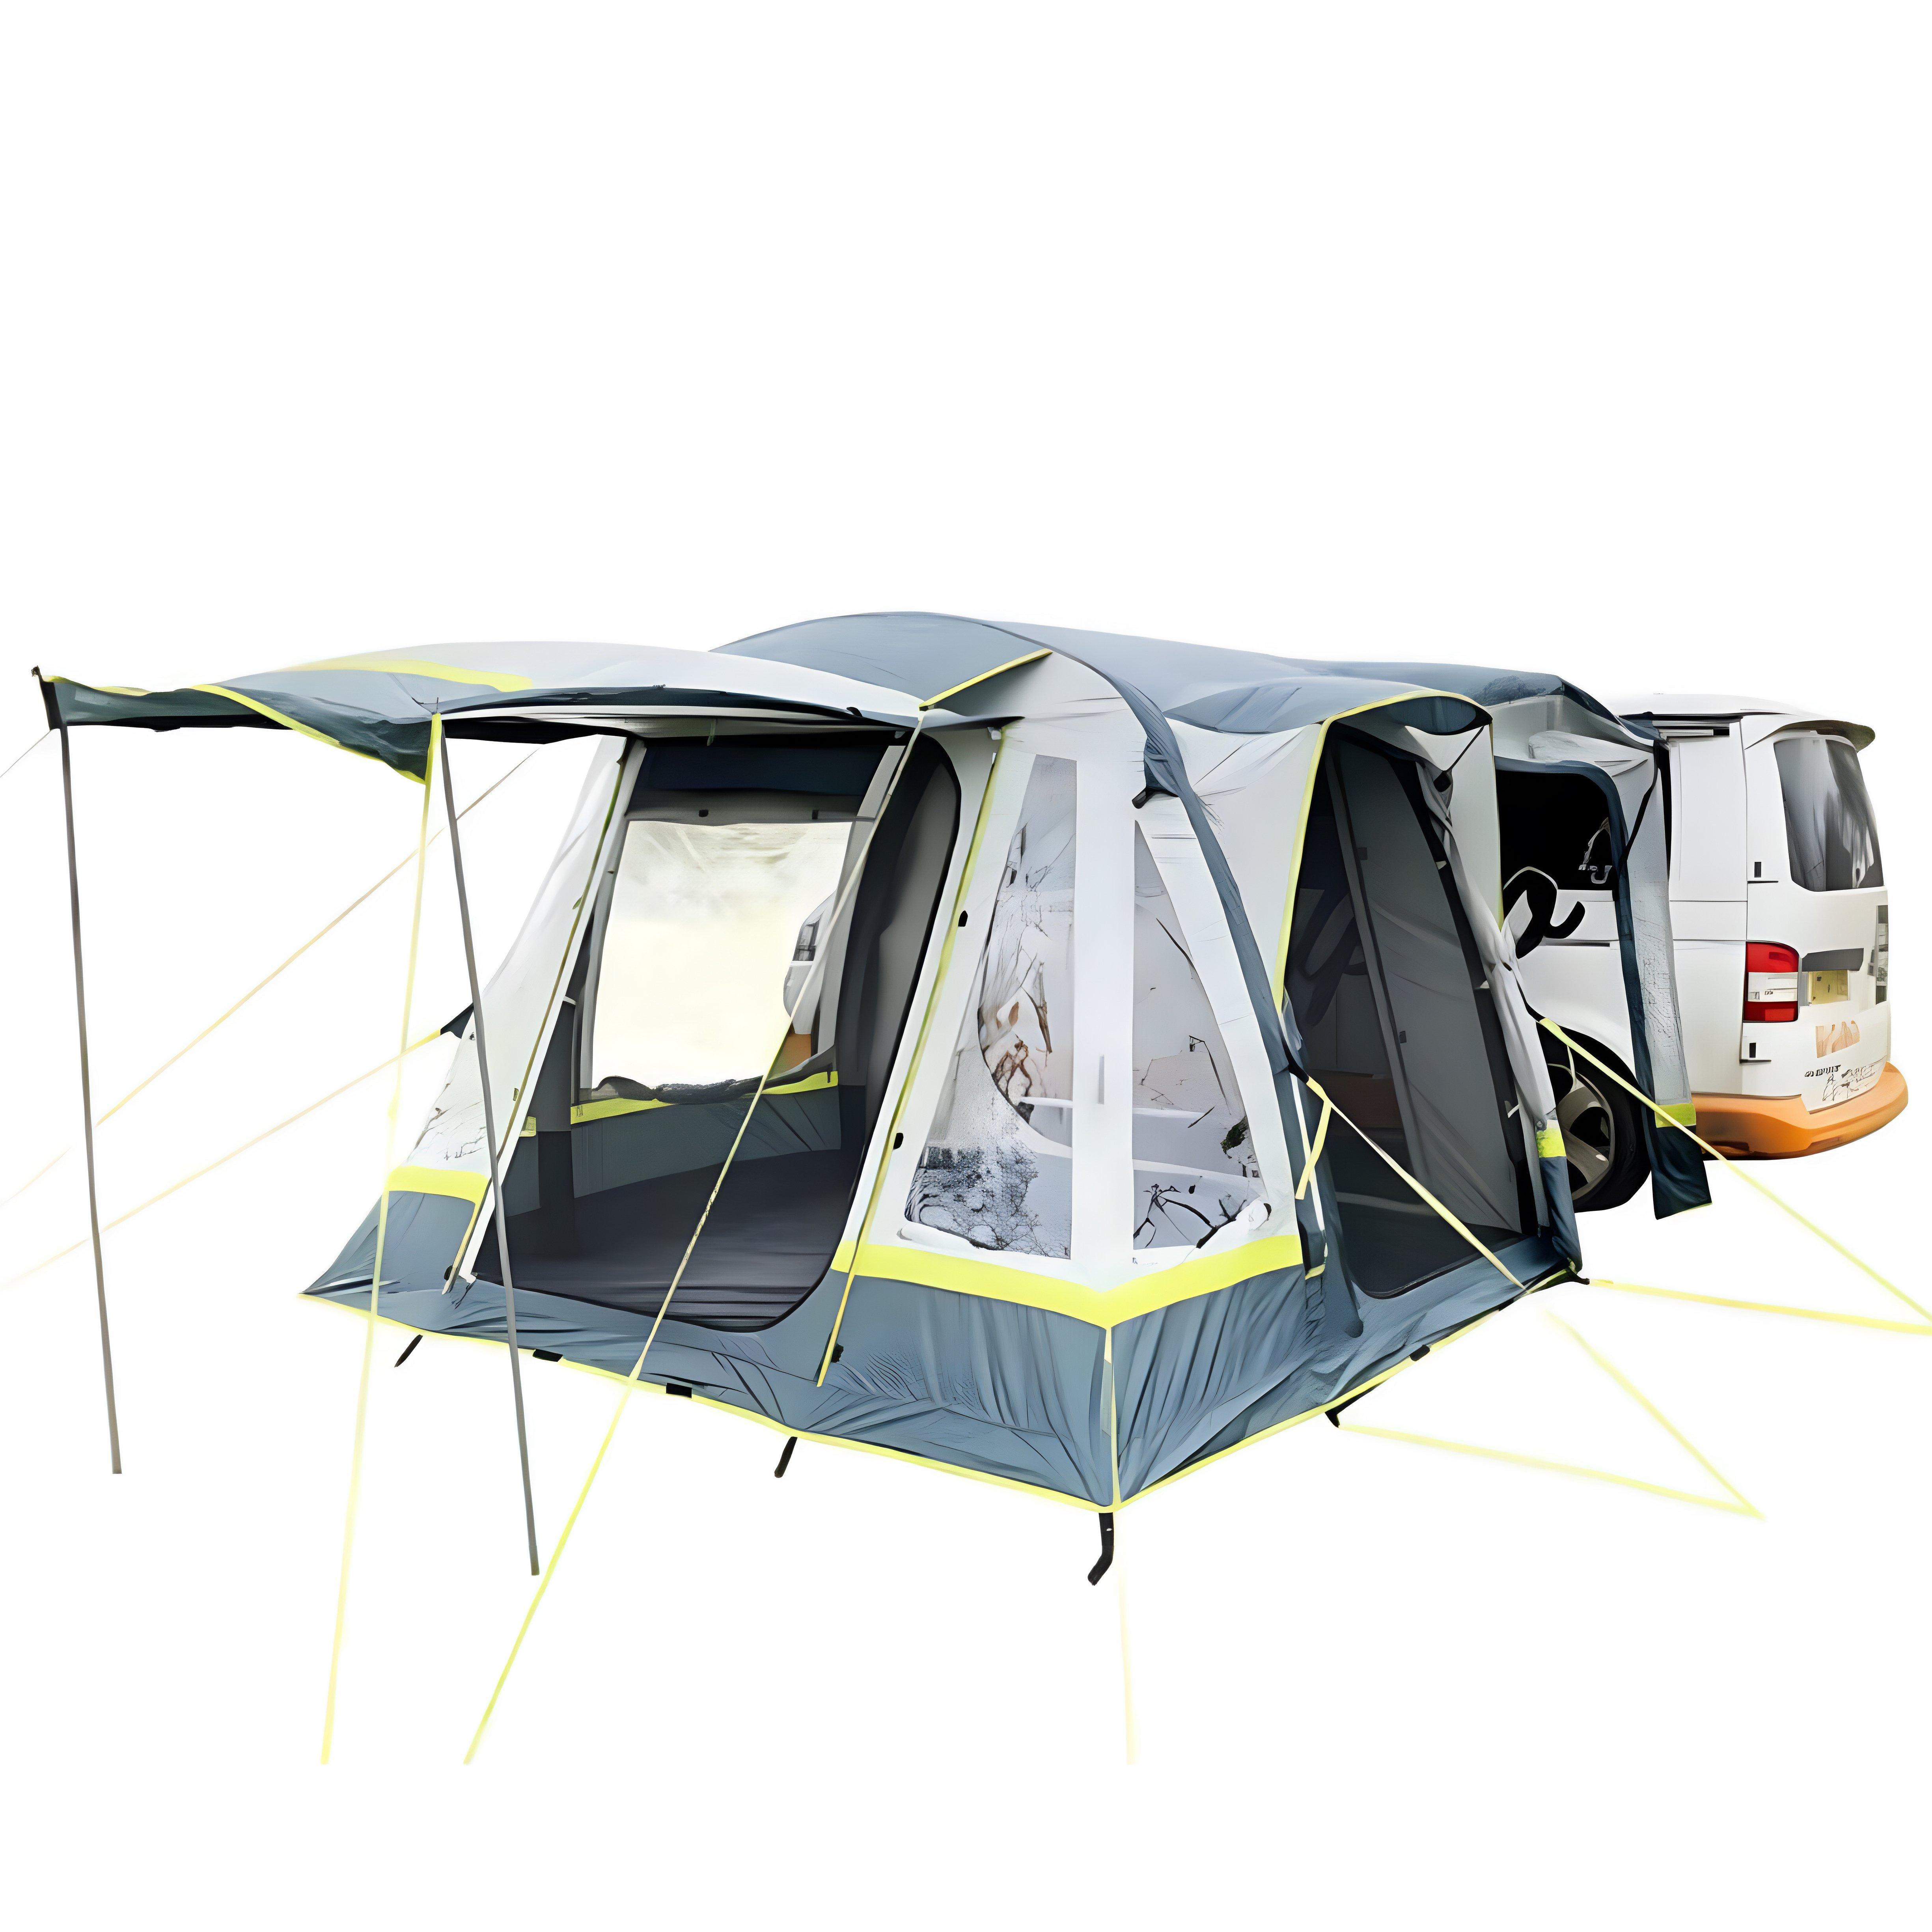 Loopo Breeze - Inflatable Campervan Awning (Light Grey/Lime) - Limited Edition